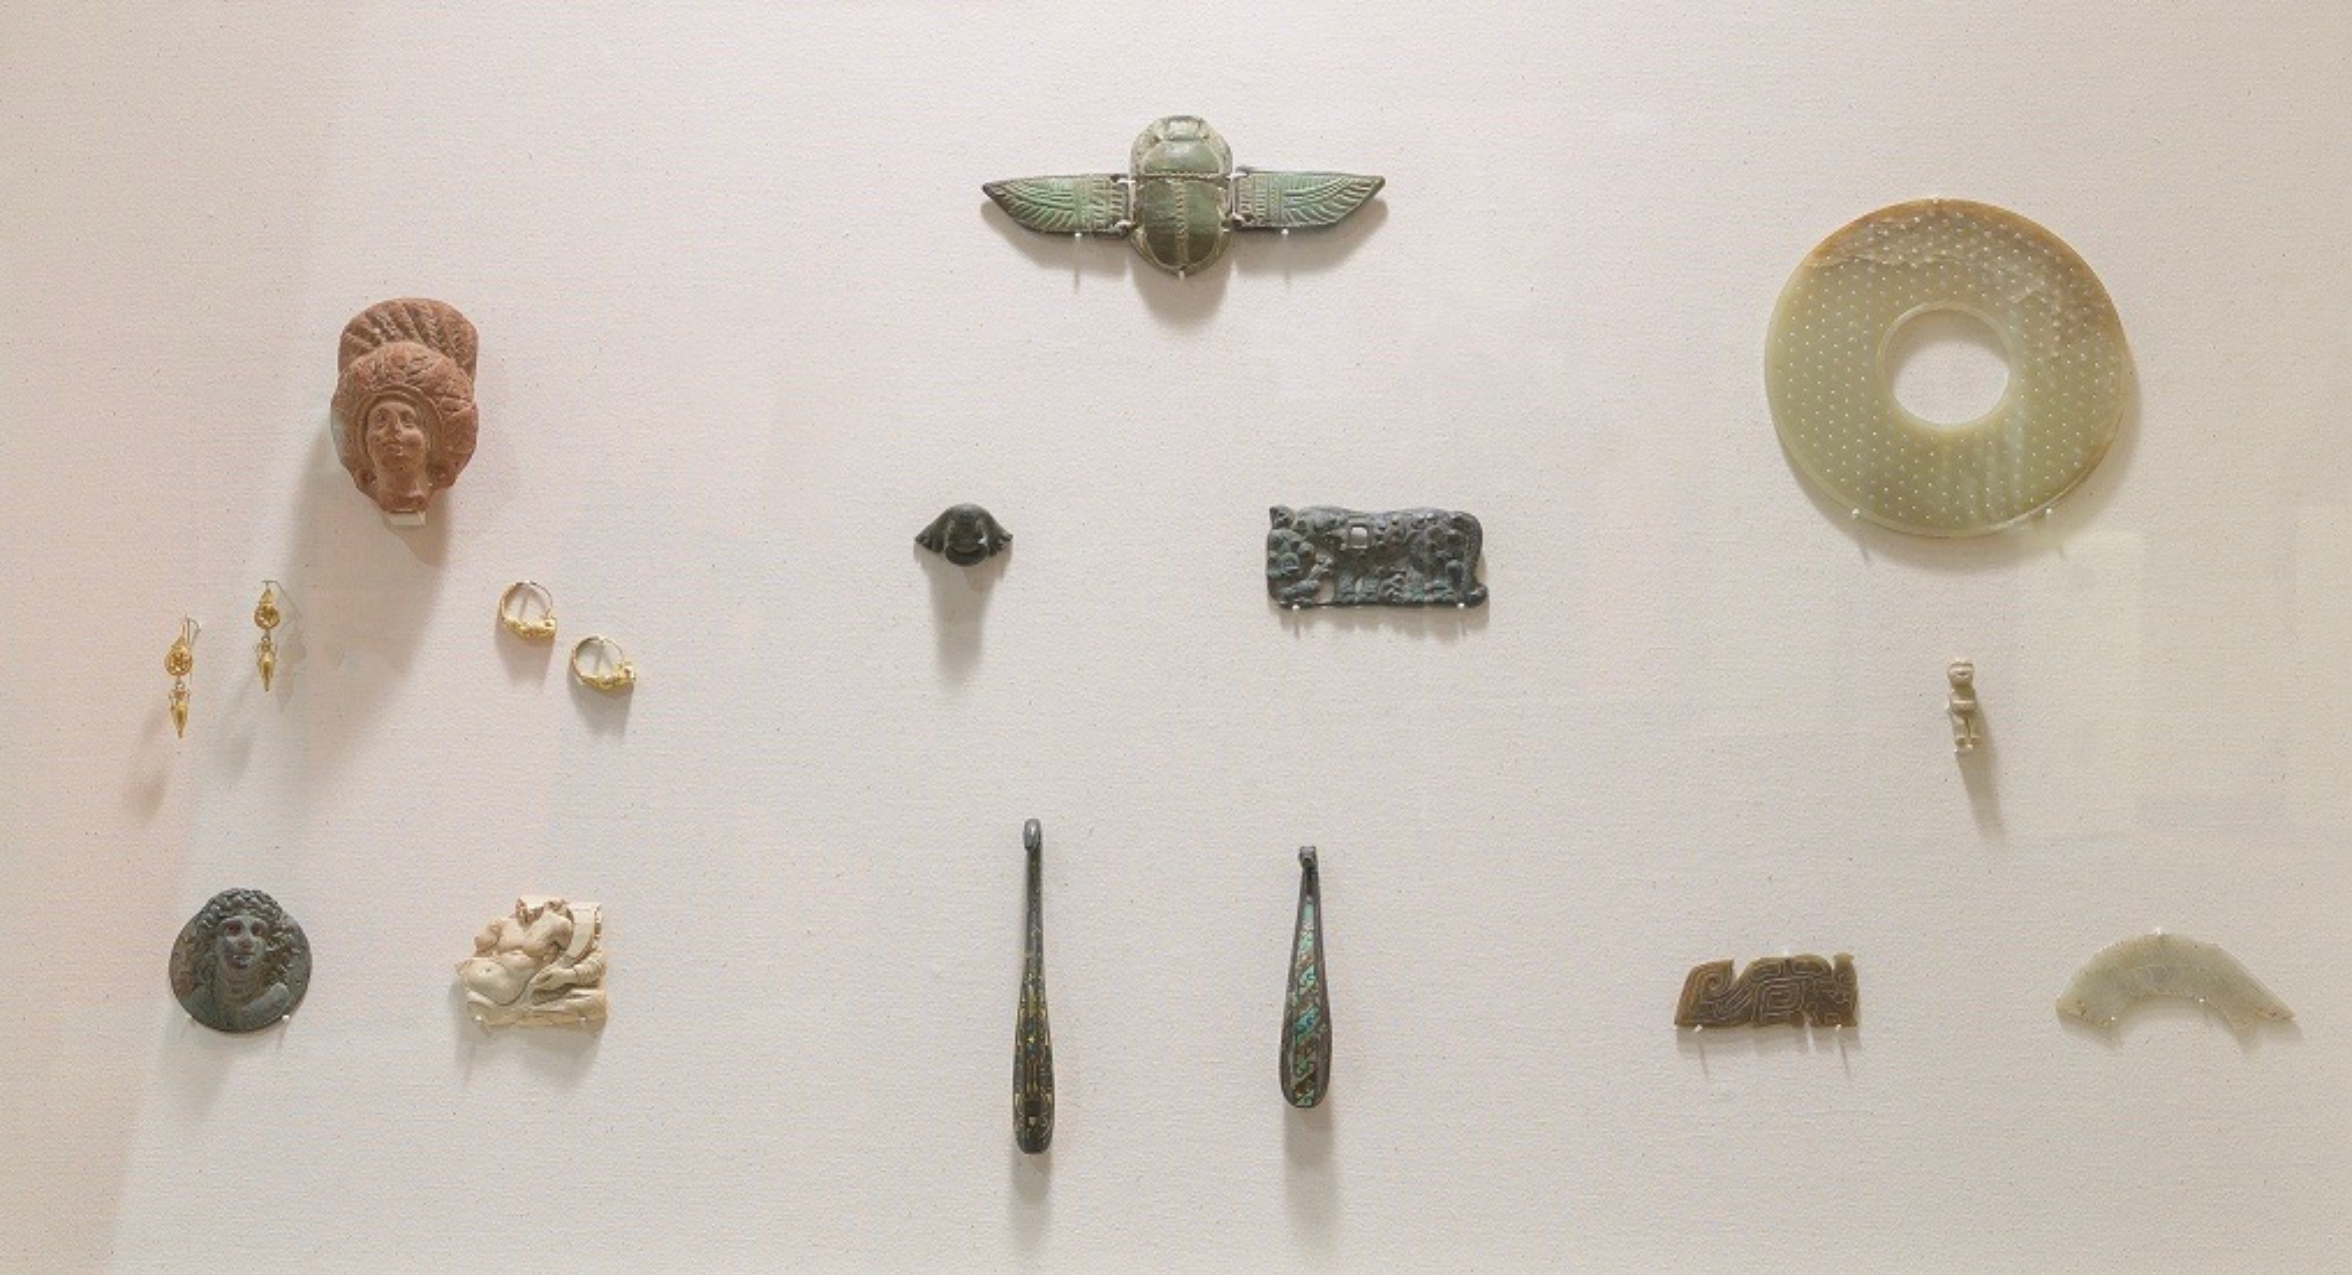 Collection of small objects on white gallery wall: Chinese jade pendants in the shapes of a human figure, a dragon, and a fish can be seen along with Greek and Roman earrings, an Egyptian scarab, and a Sino-Siberian belt plaque